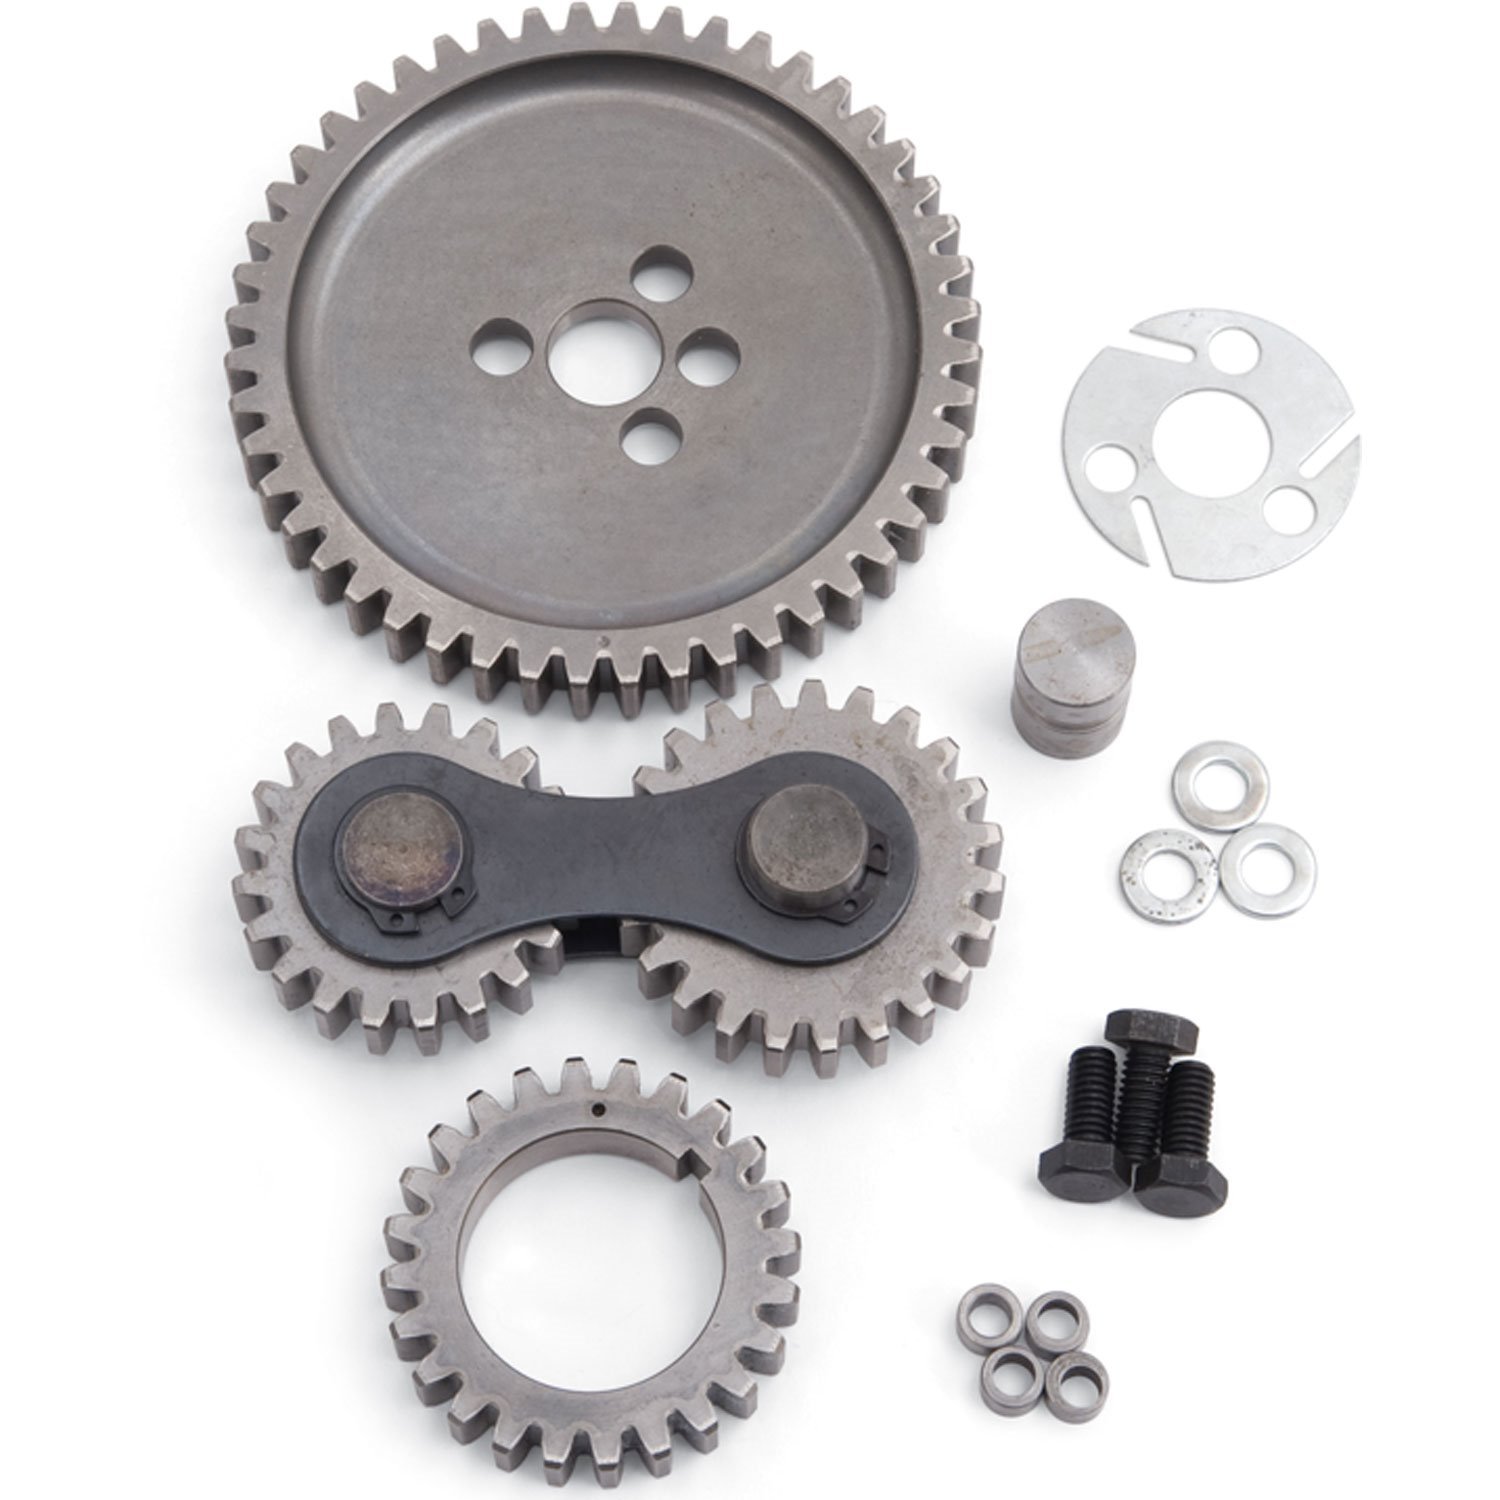 Accu-Drive Camshaft Timing Gear Drive for 1965-1990 Big